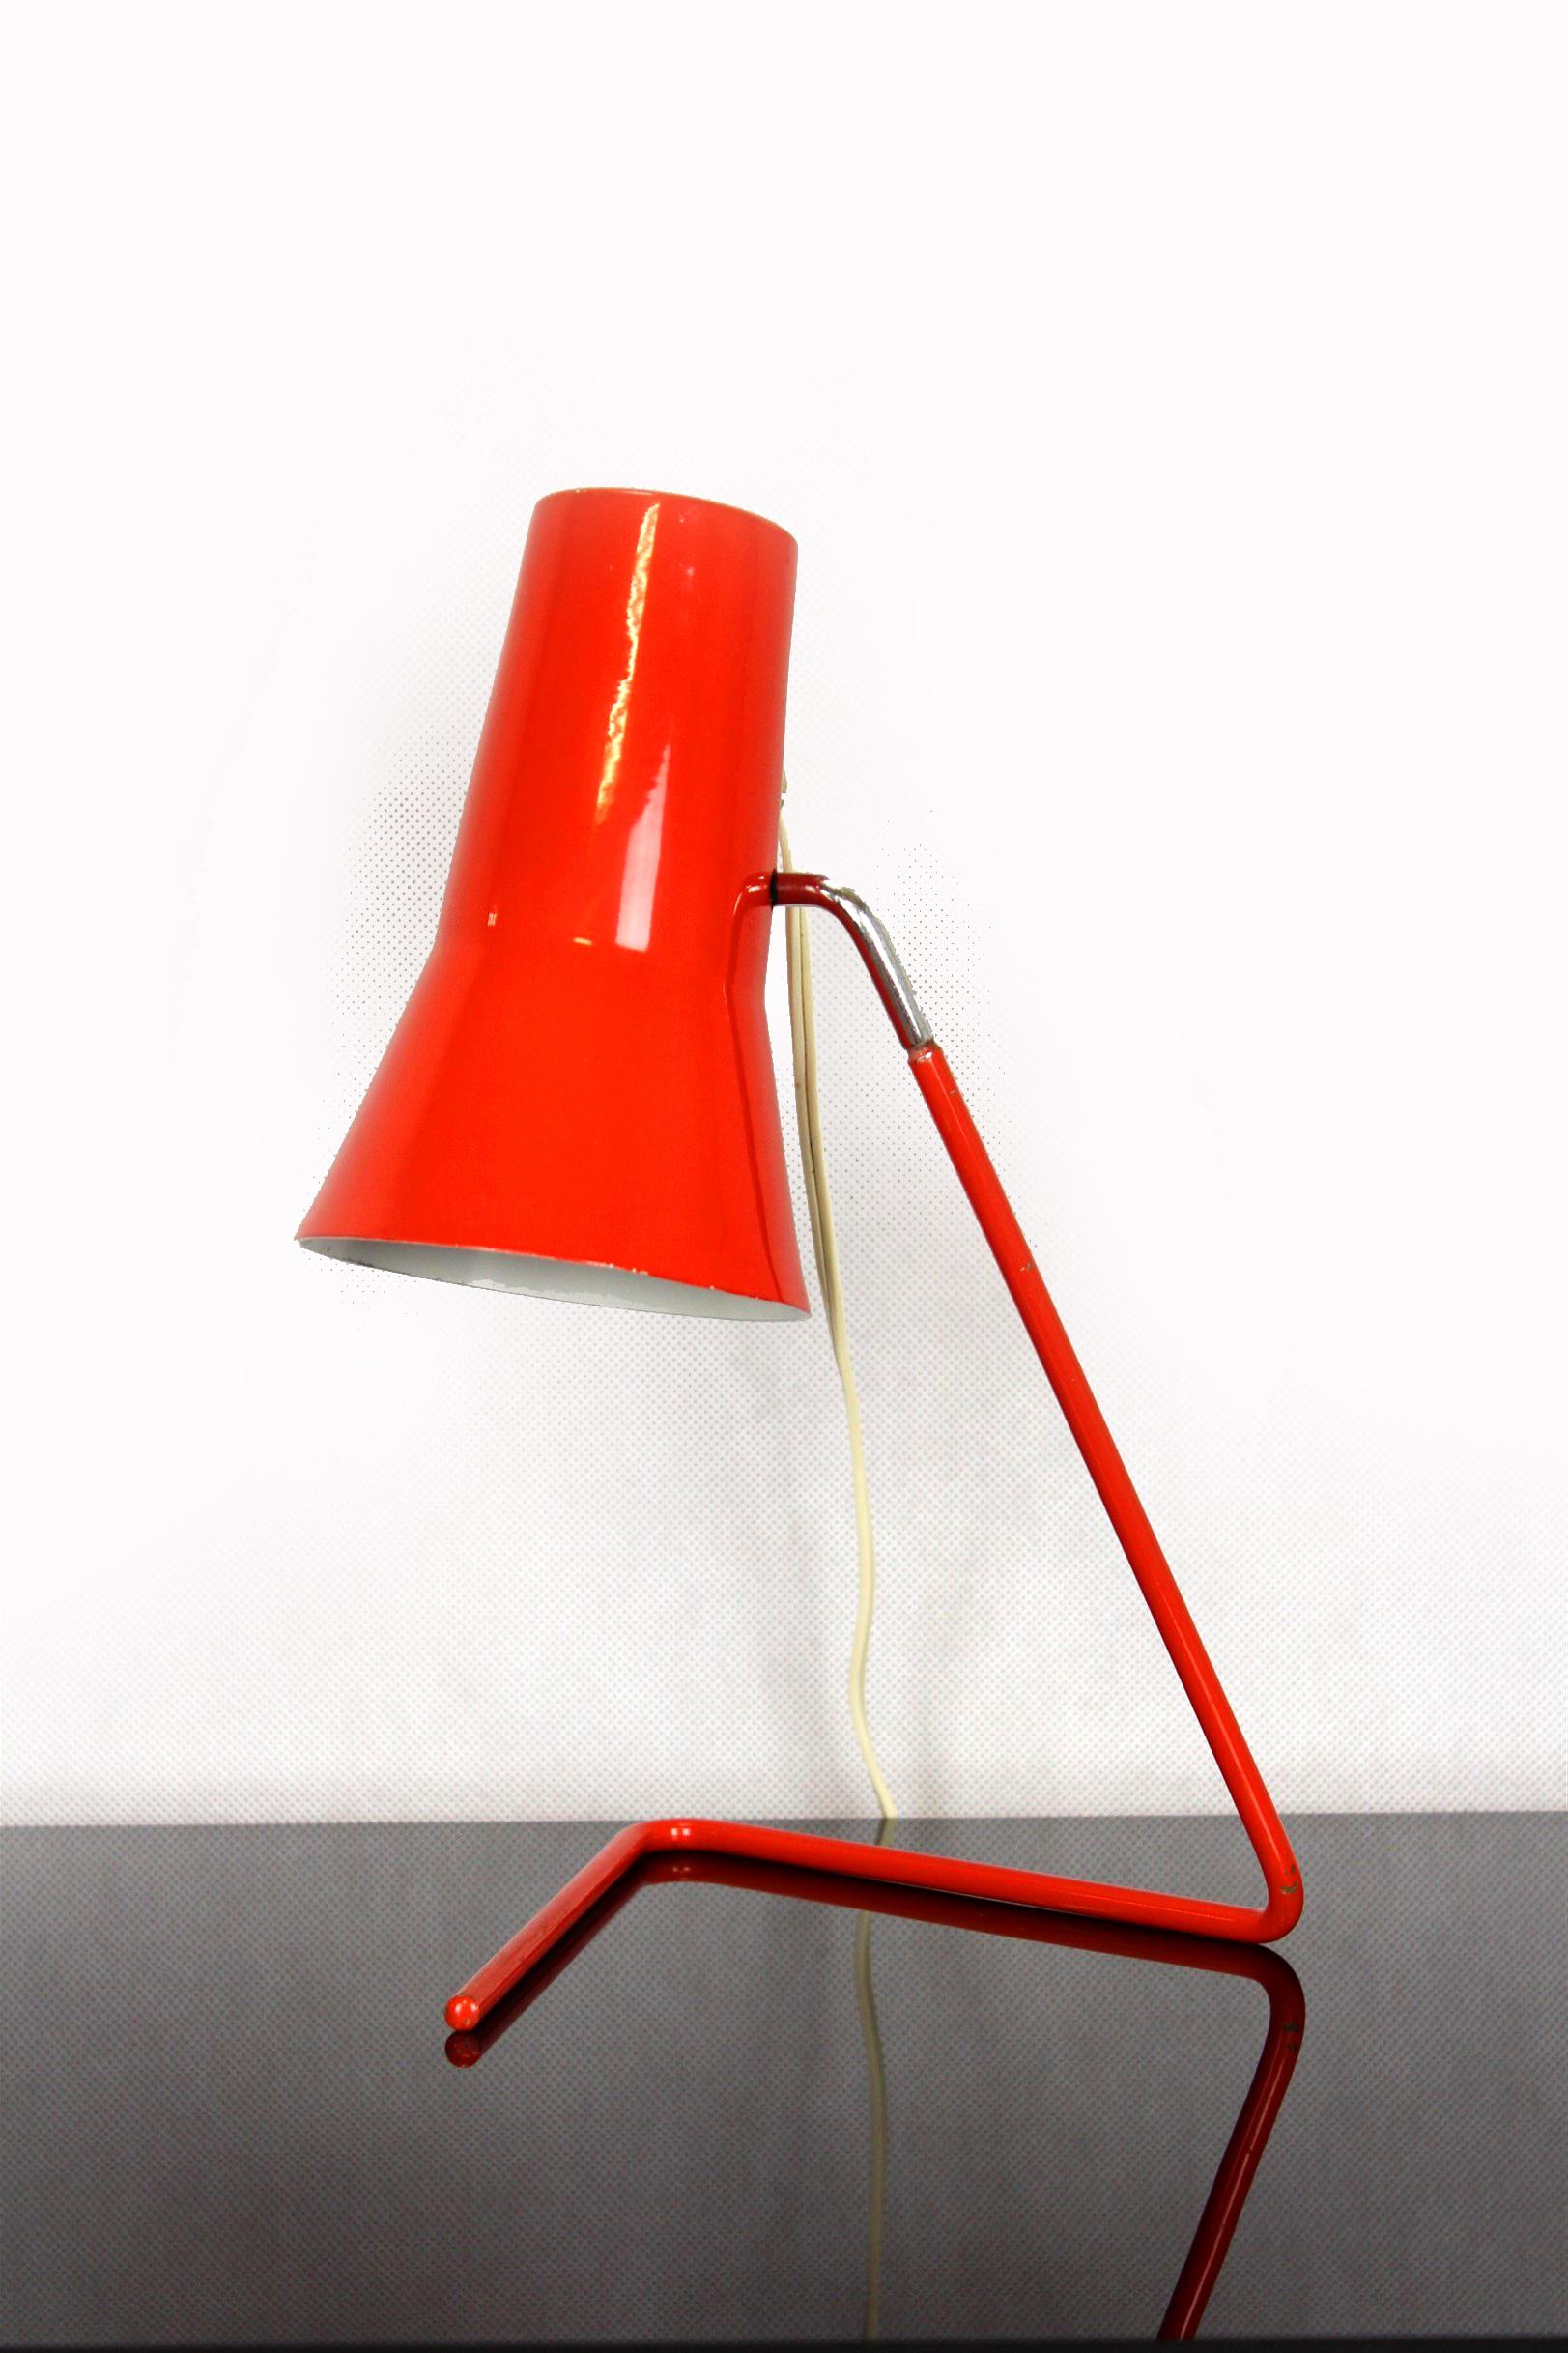 This red table lamp was manufactured by Drupol and designed by Josef Hurka in the mid 1960s. Original, good condition, fully functional.